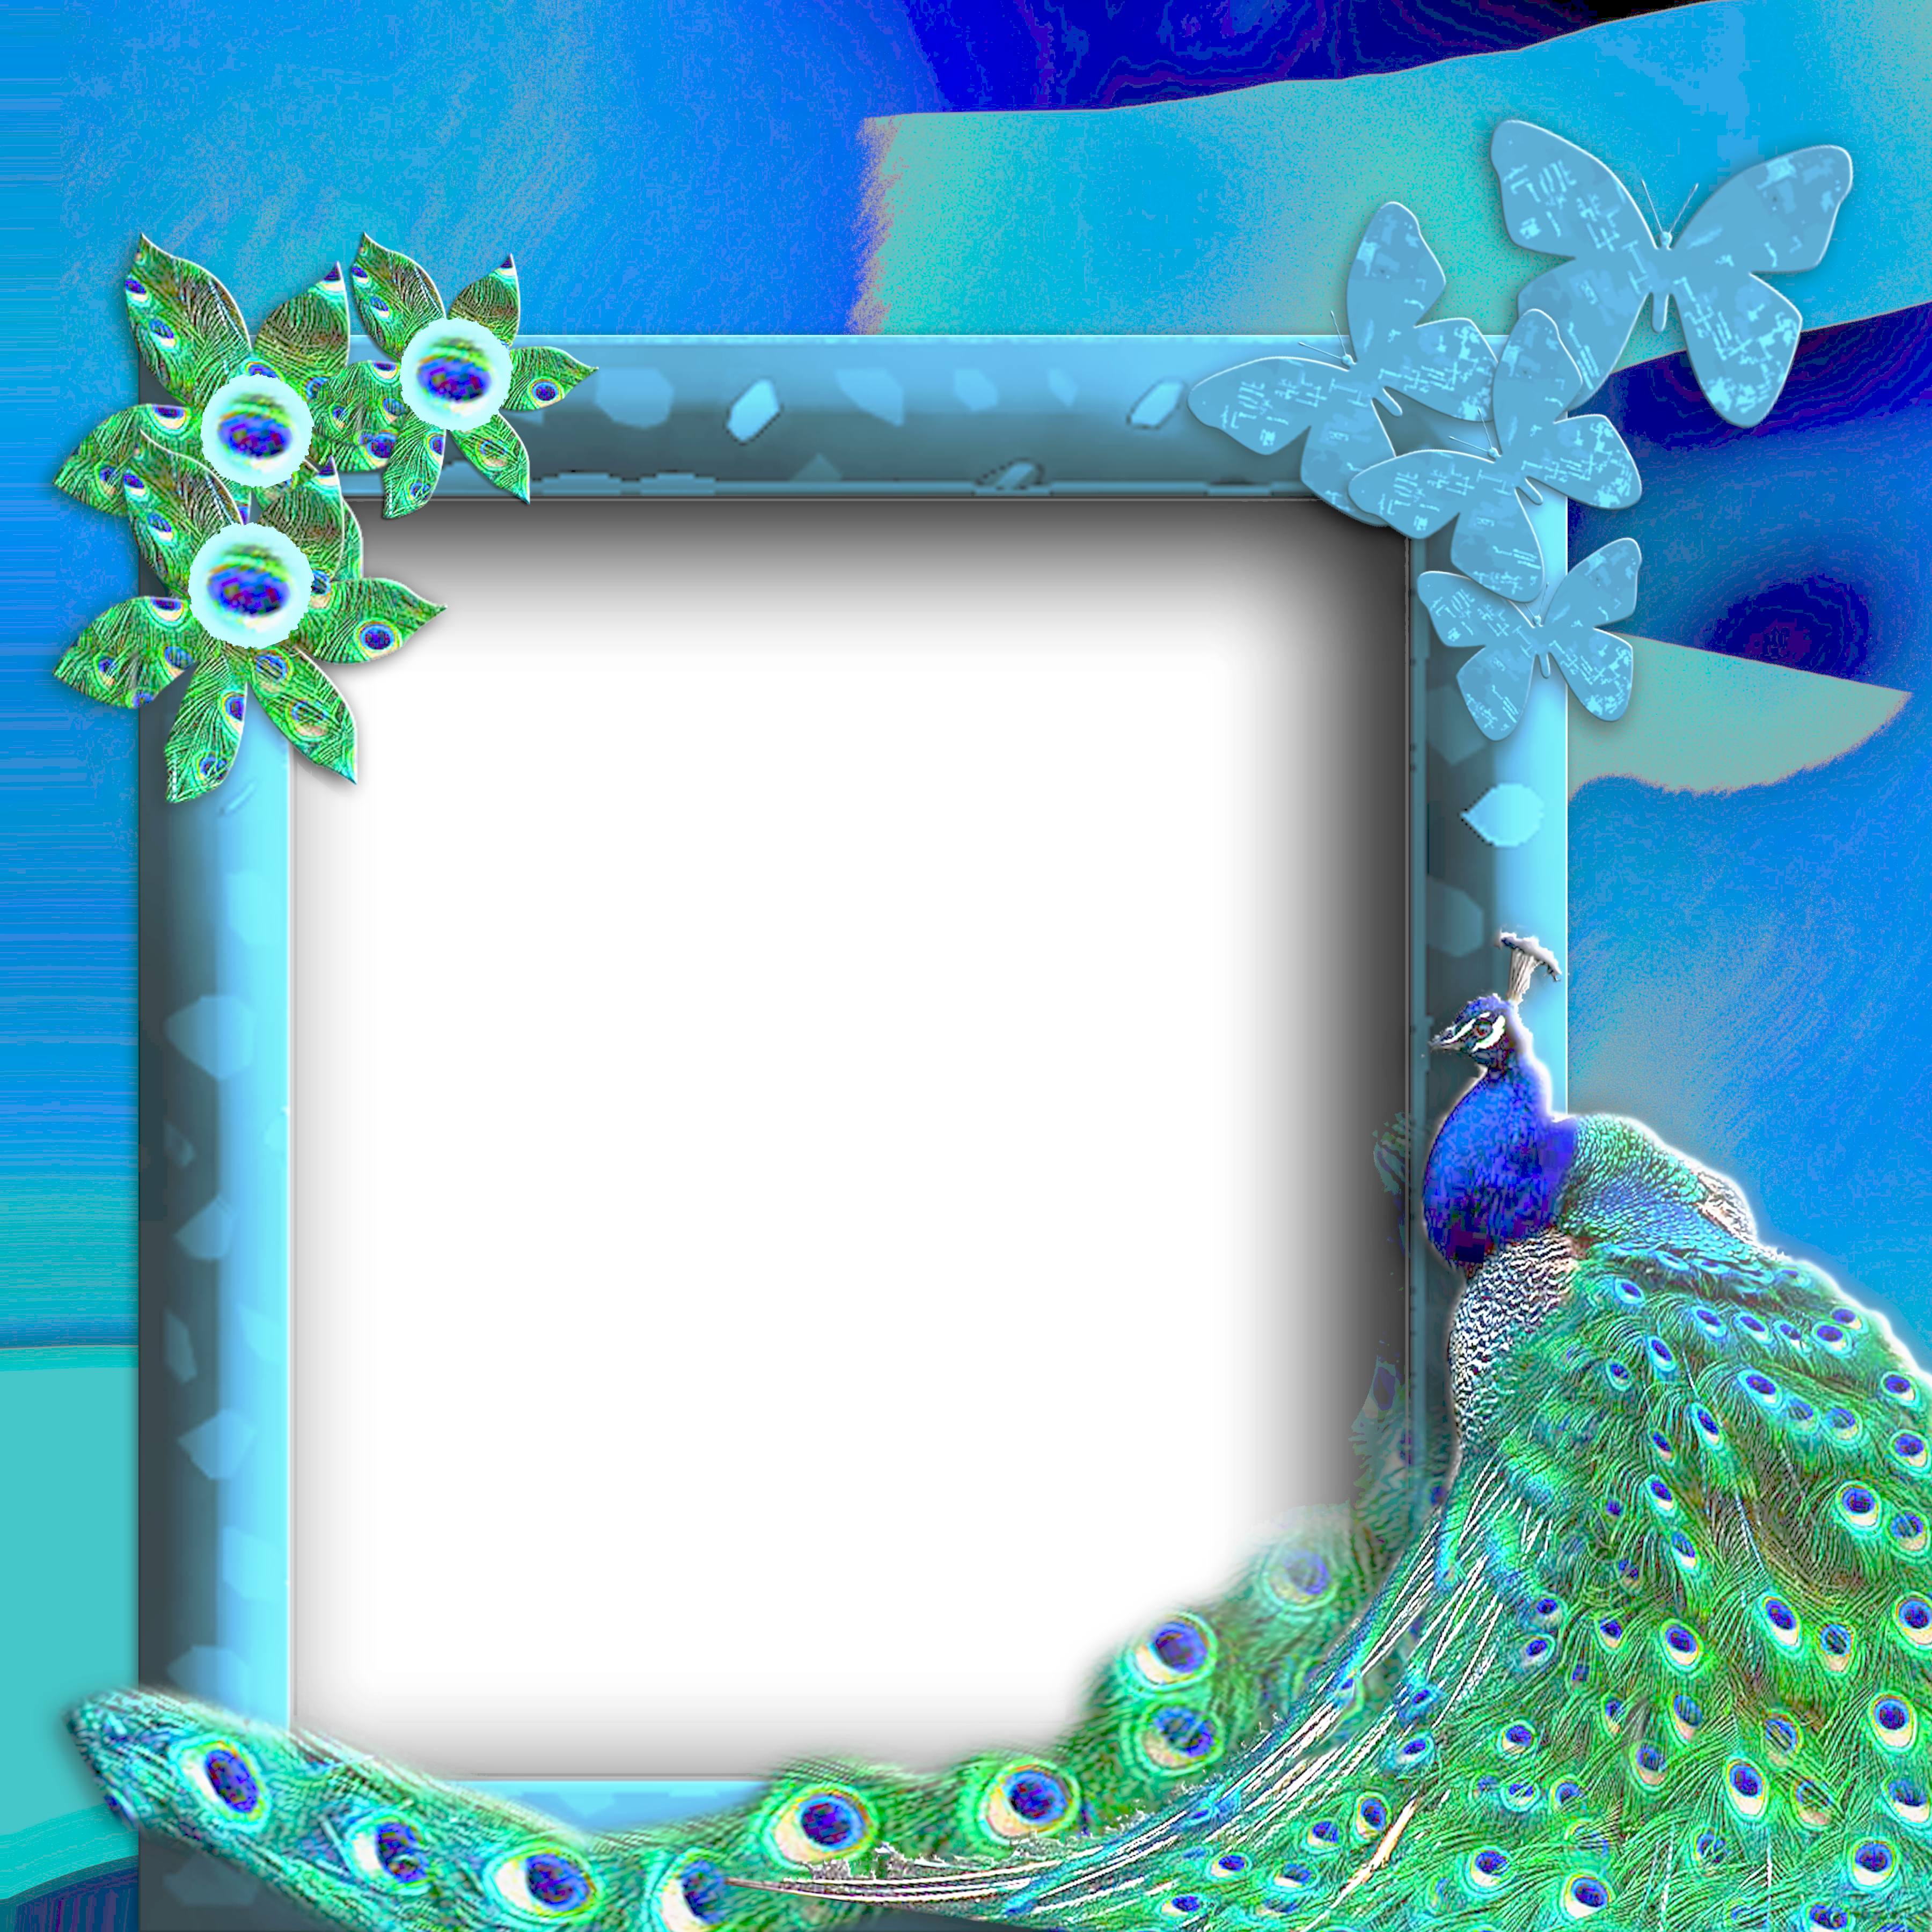 Download Peacock Photo Frame Png PNG Image with No Background 